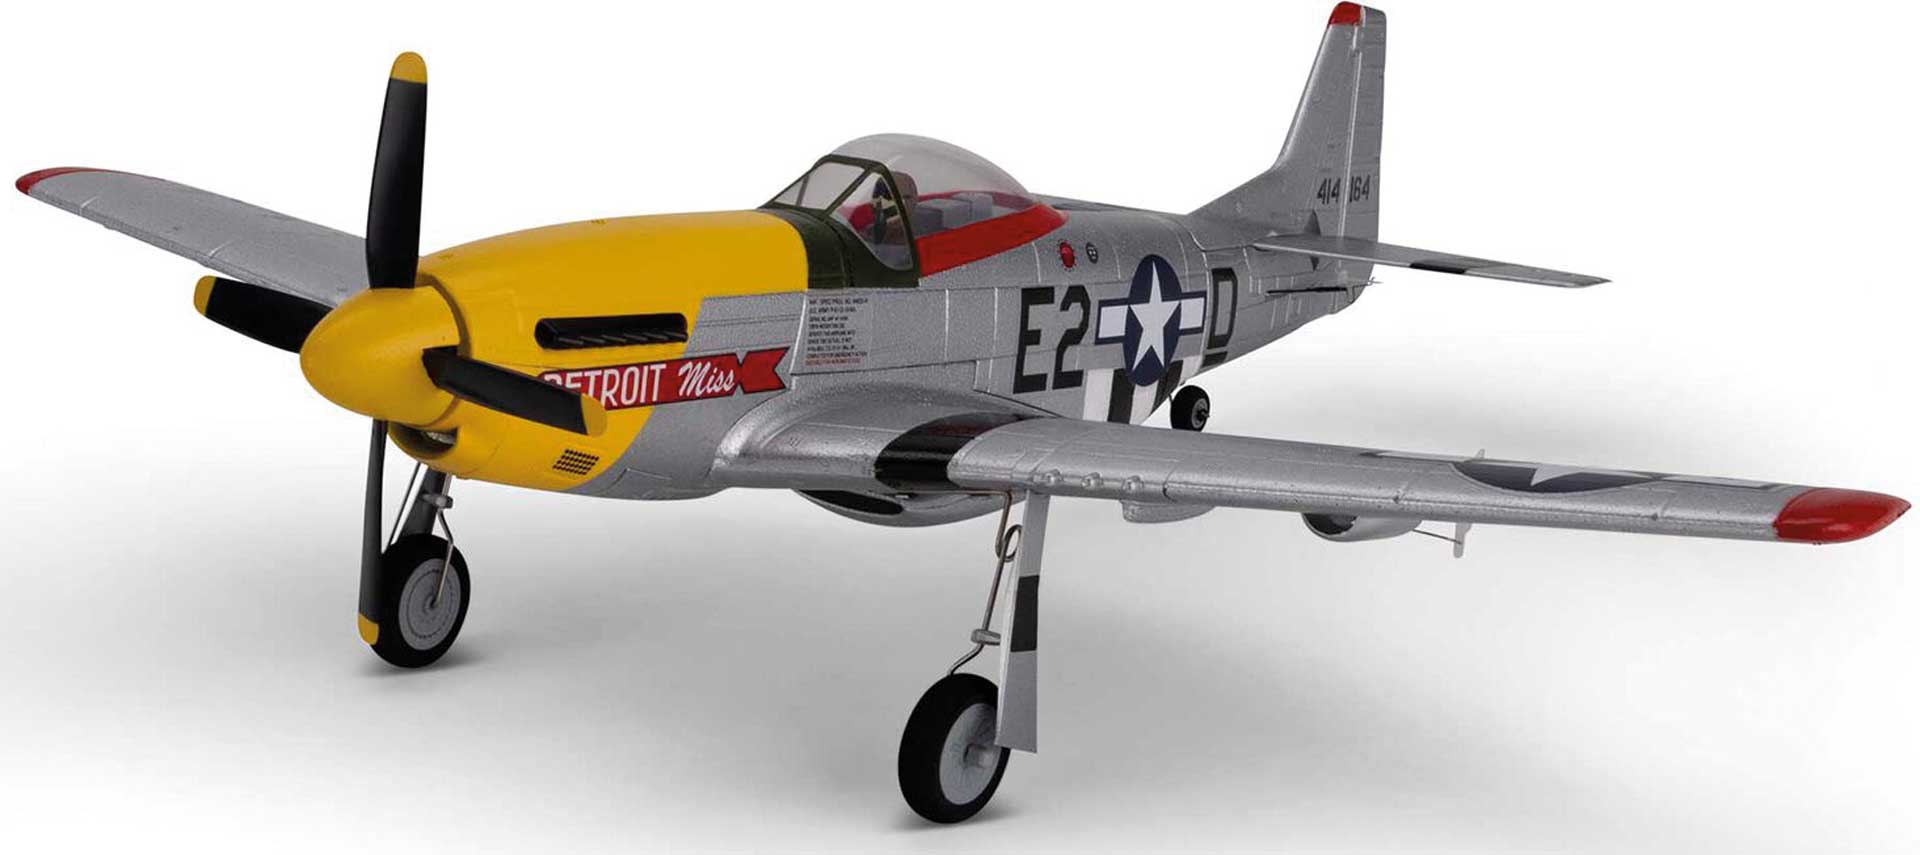 E-FLITE UMX P-51D Mustang "Detroit Miss" BNF Basic mit AS3X und SAFE Select